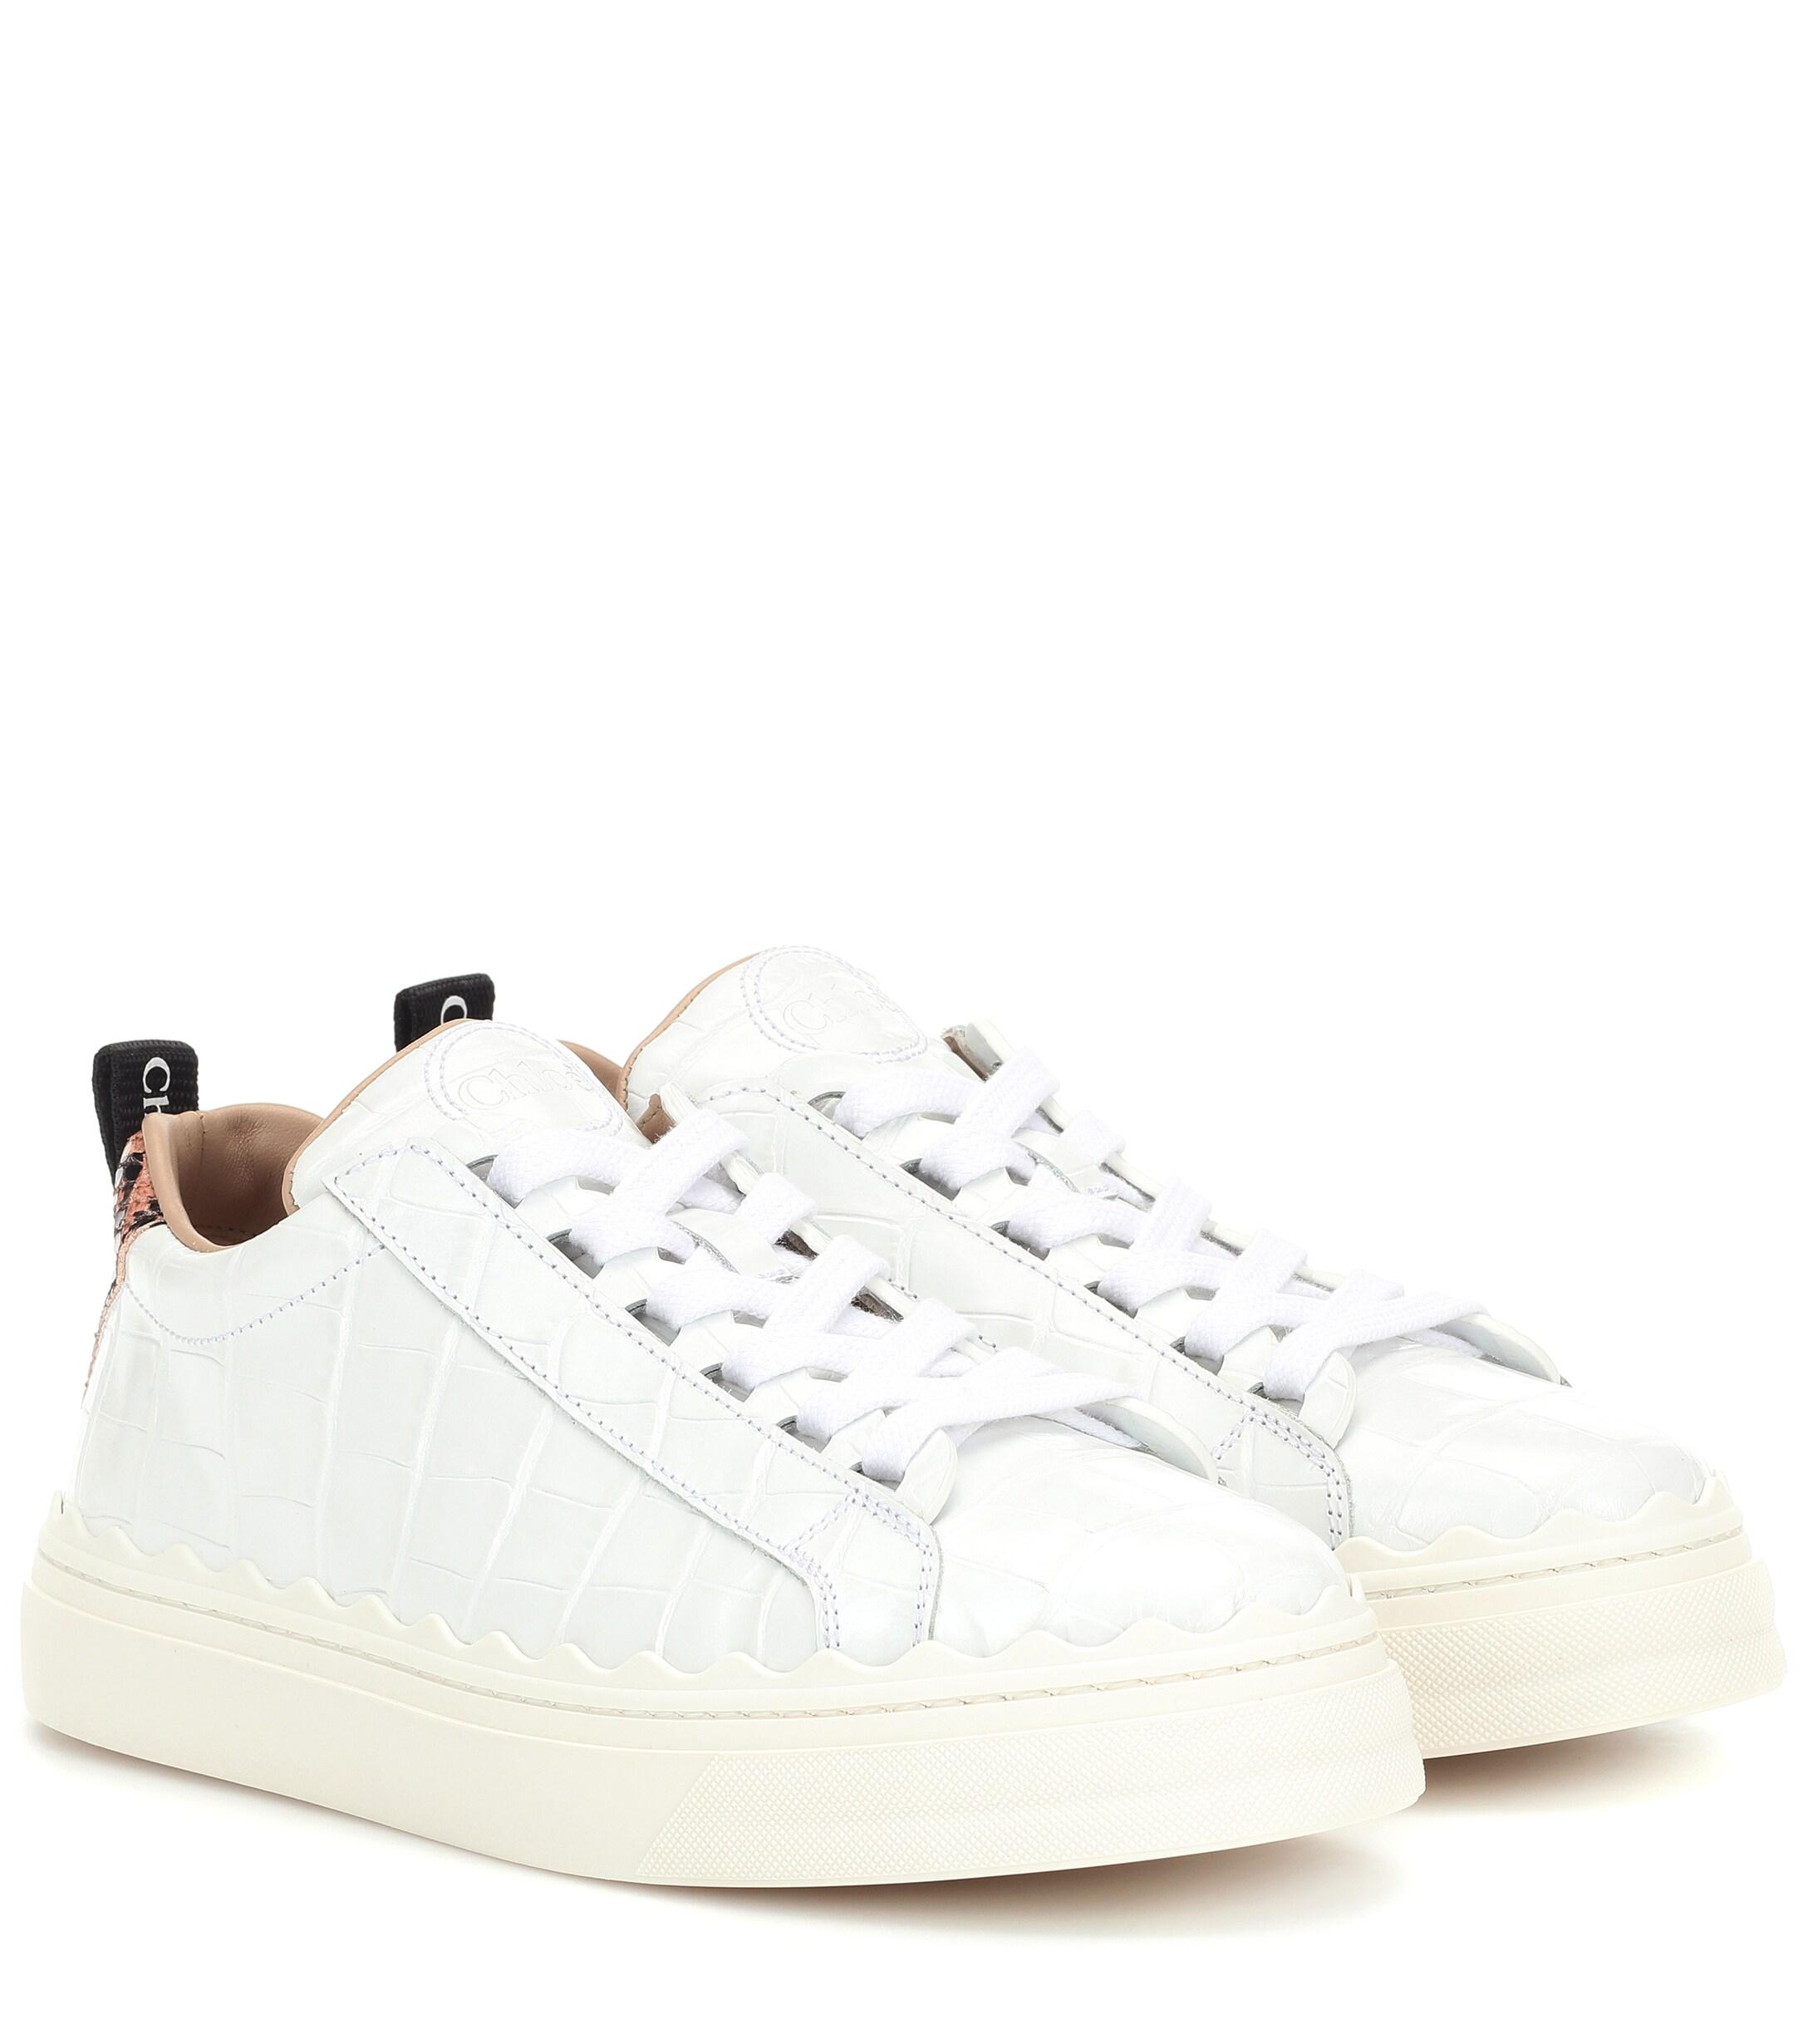 Chloé Lauren Low-top Leather Sneakers in White - Save 19% - Lyst